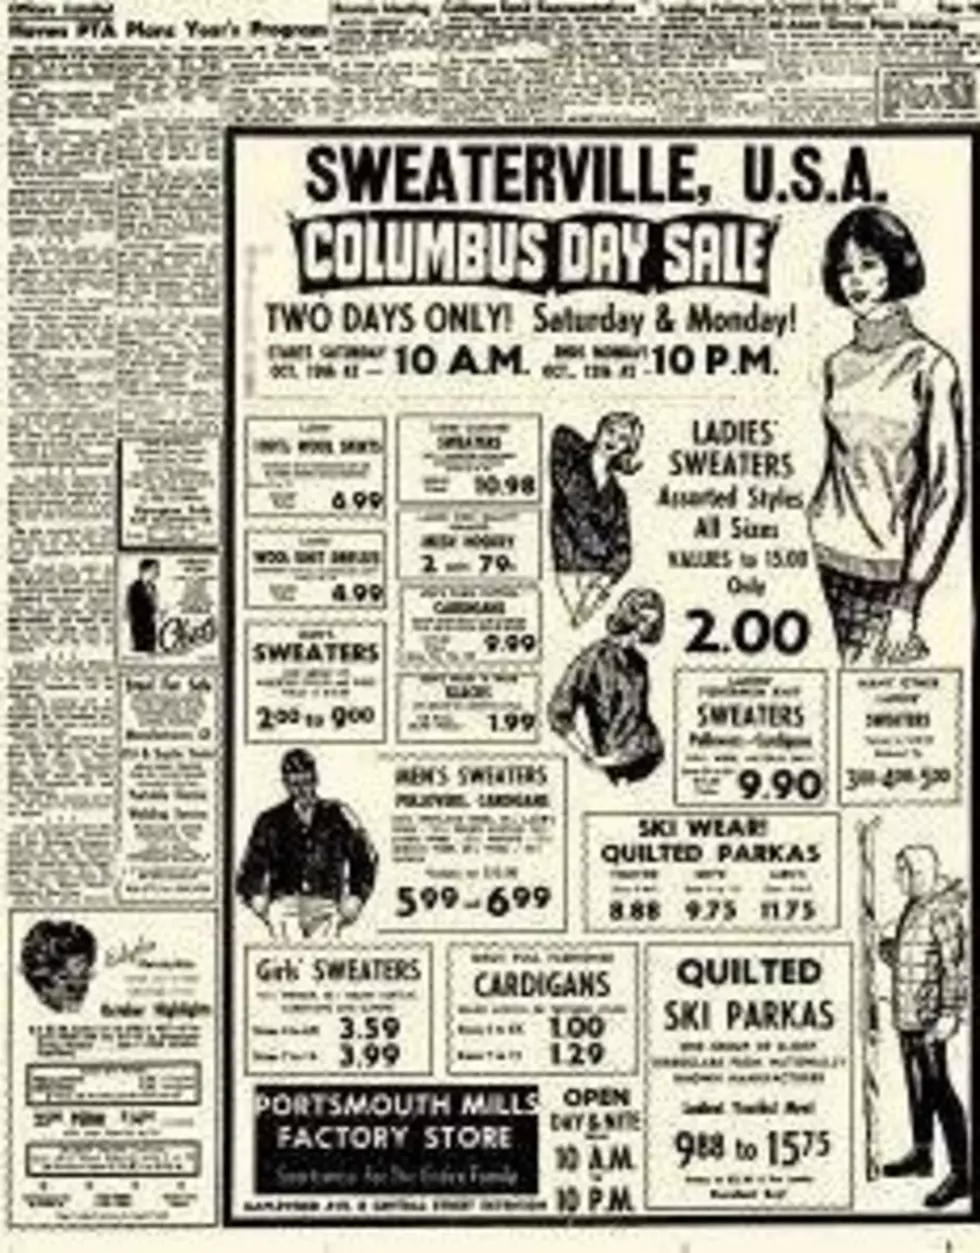 Do You Remember Shopping at Artisan Outlet and Sweaterville U.S.A in Portsmouth, New Hampshire?